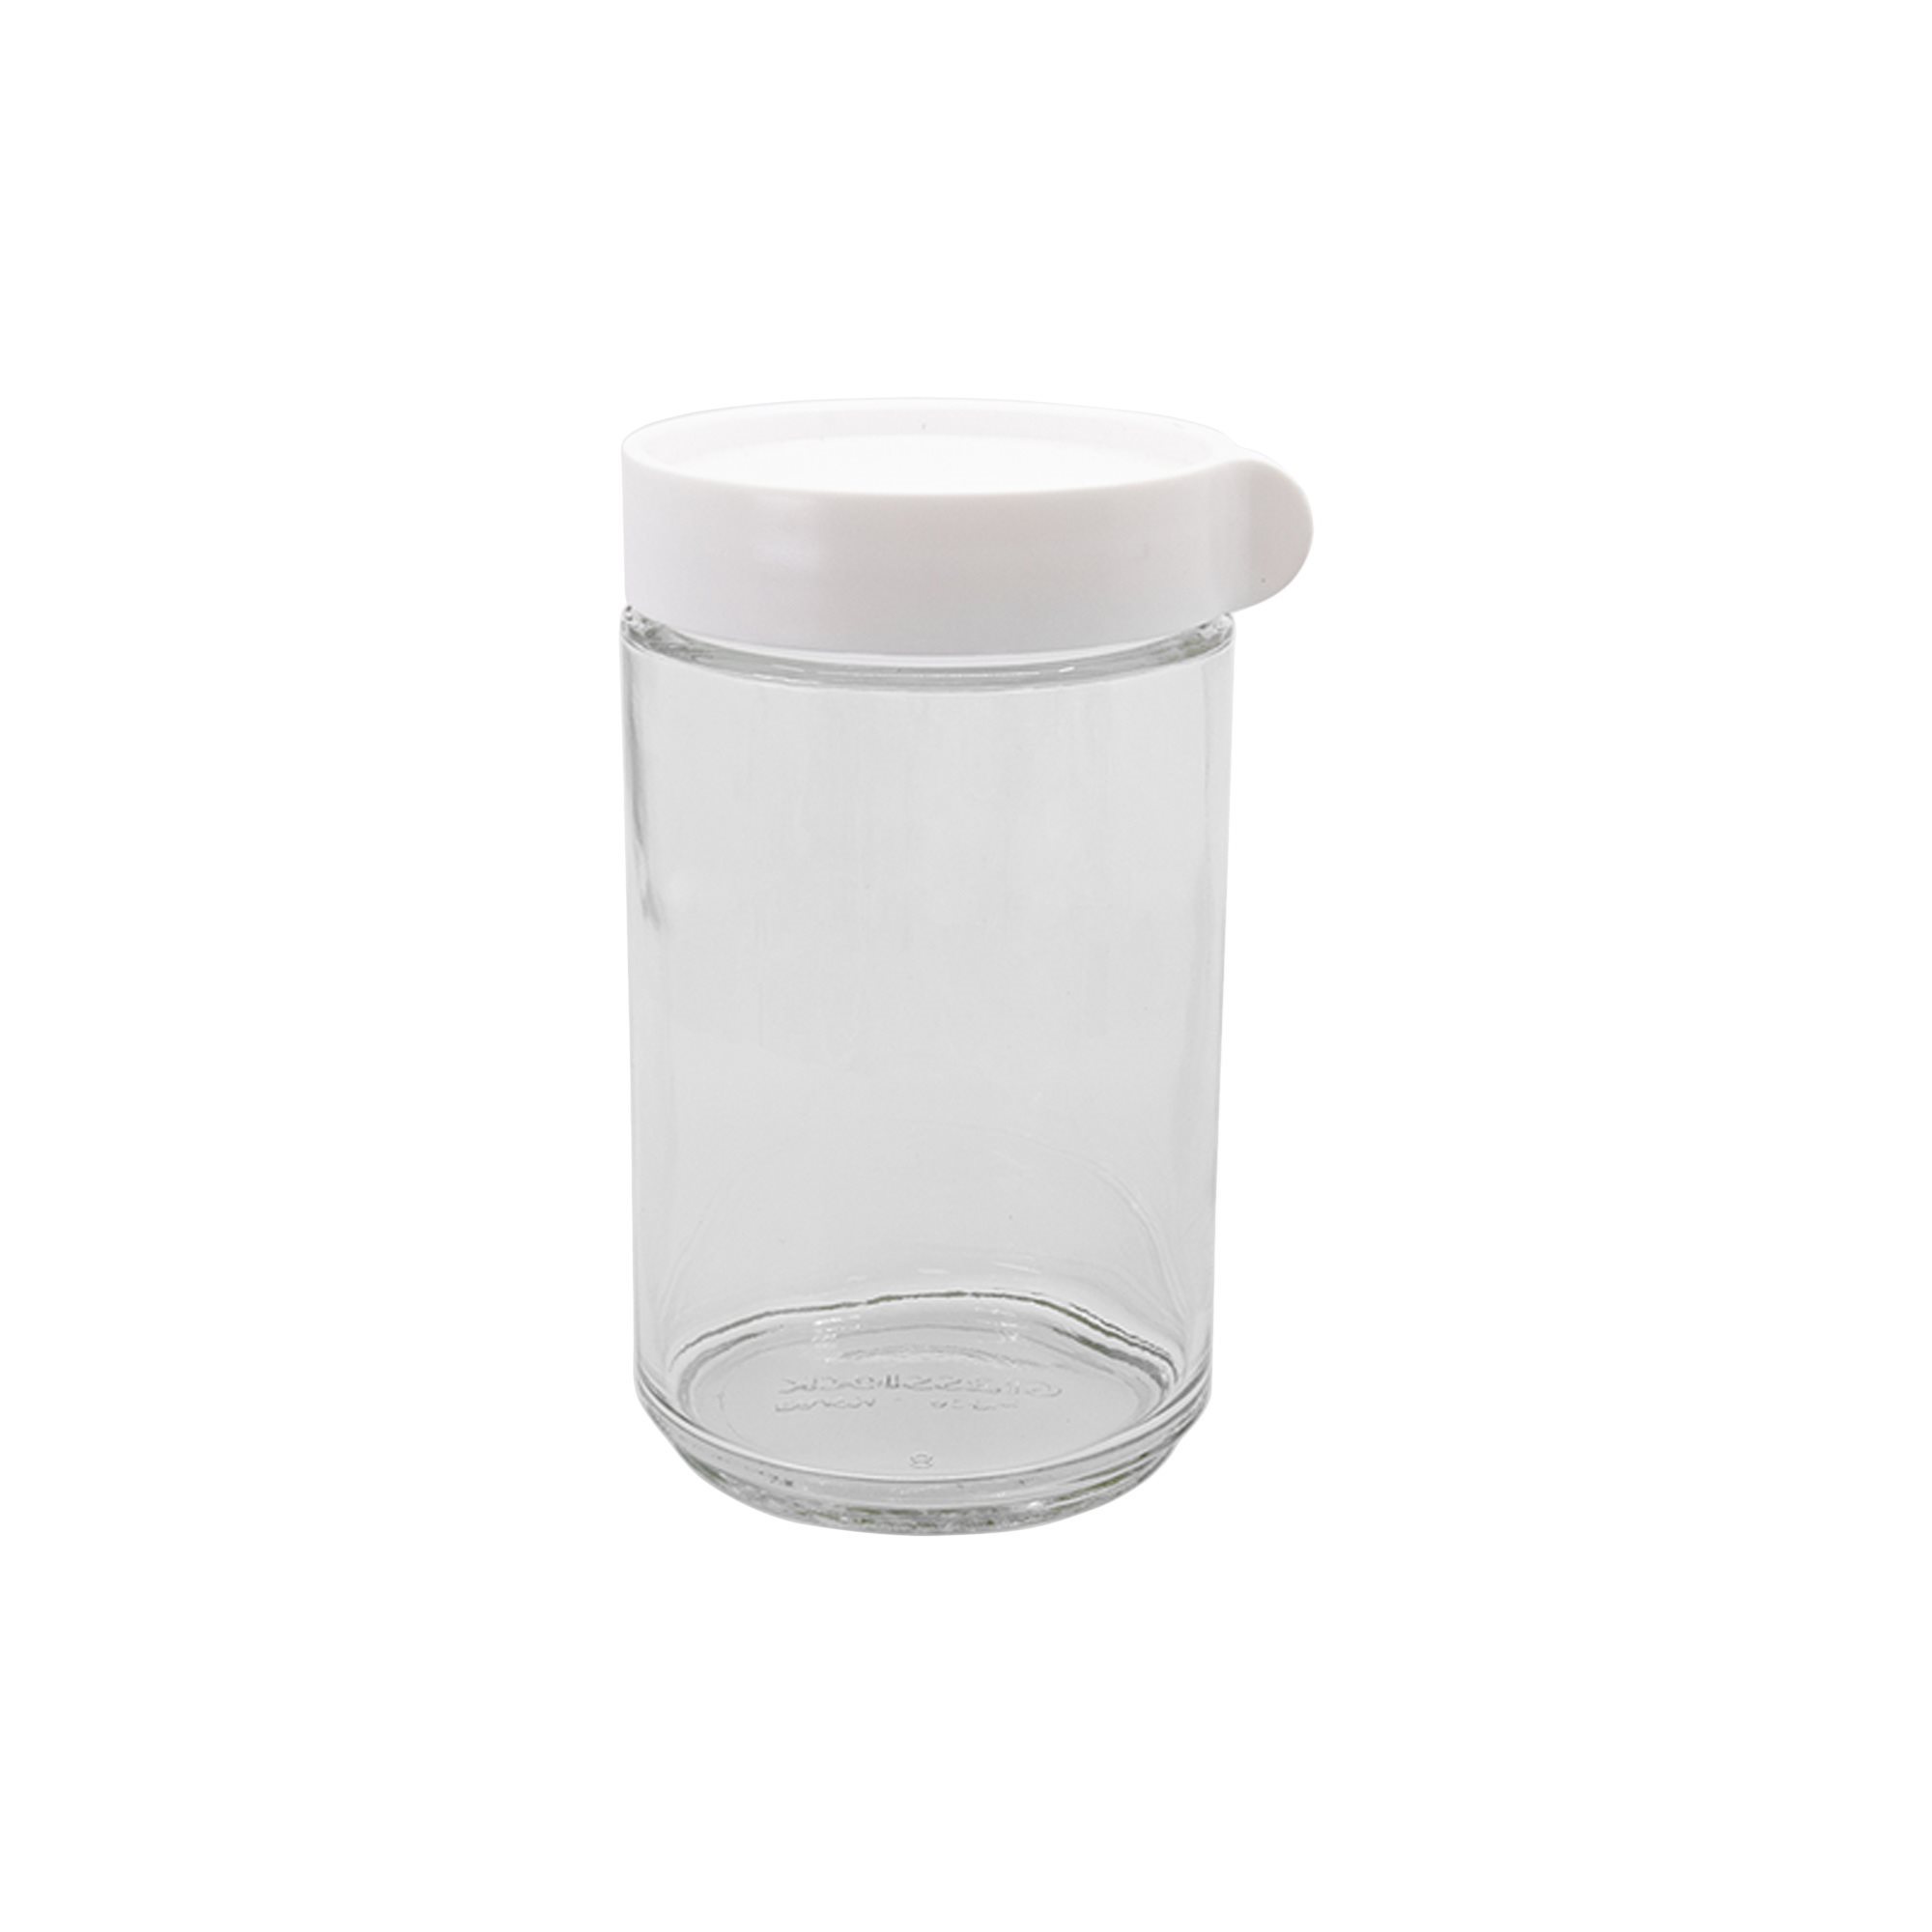 Round food storage container, 600 ml, made from glass, White